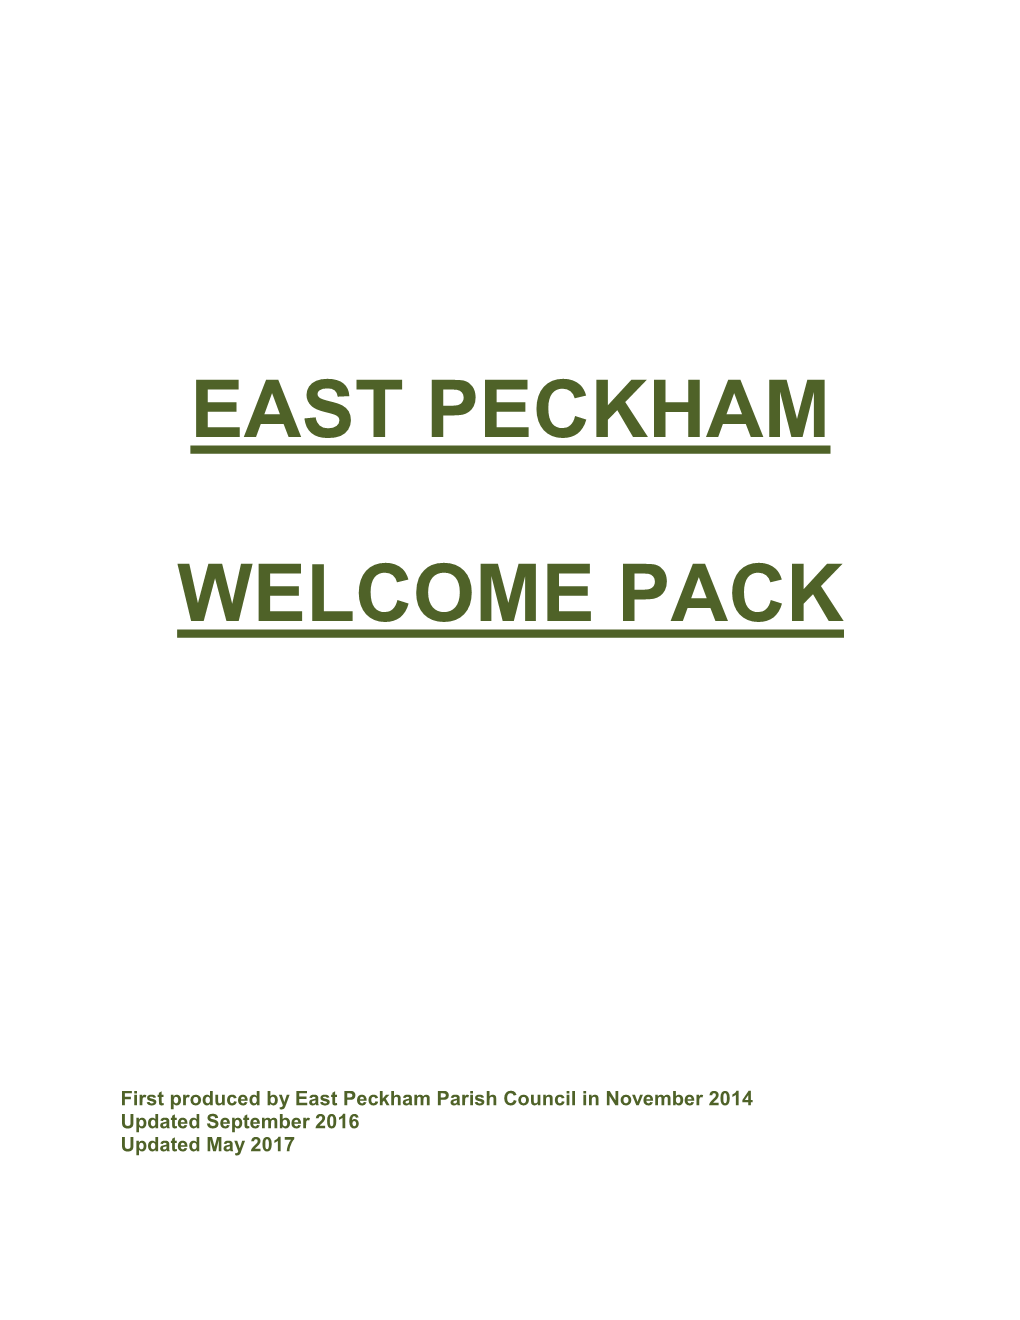 East Peckham Welcome Pack